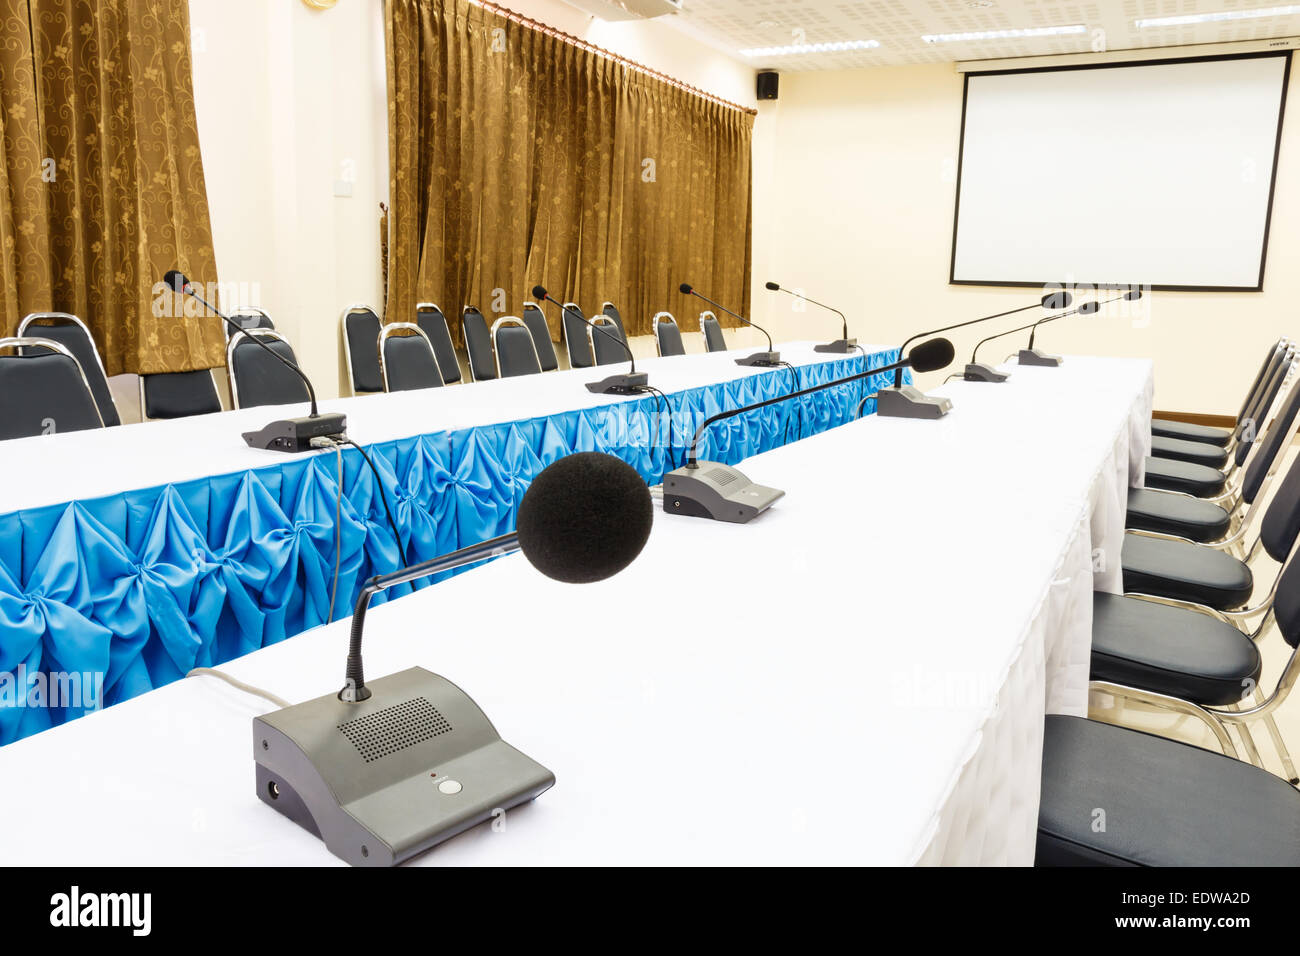 Microphones on table in a conference room Stock Photo